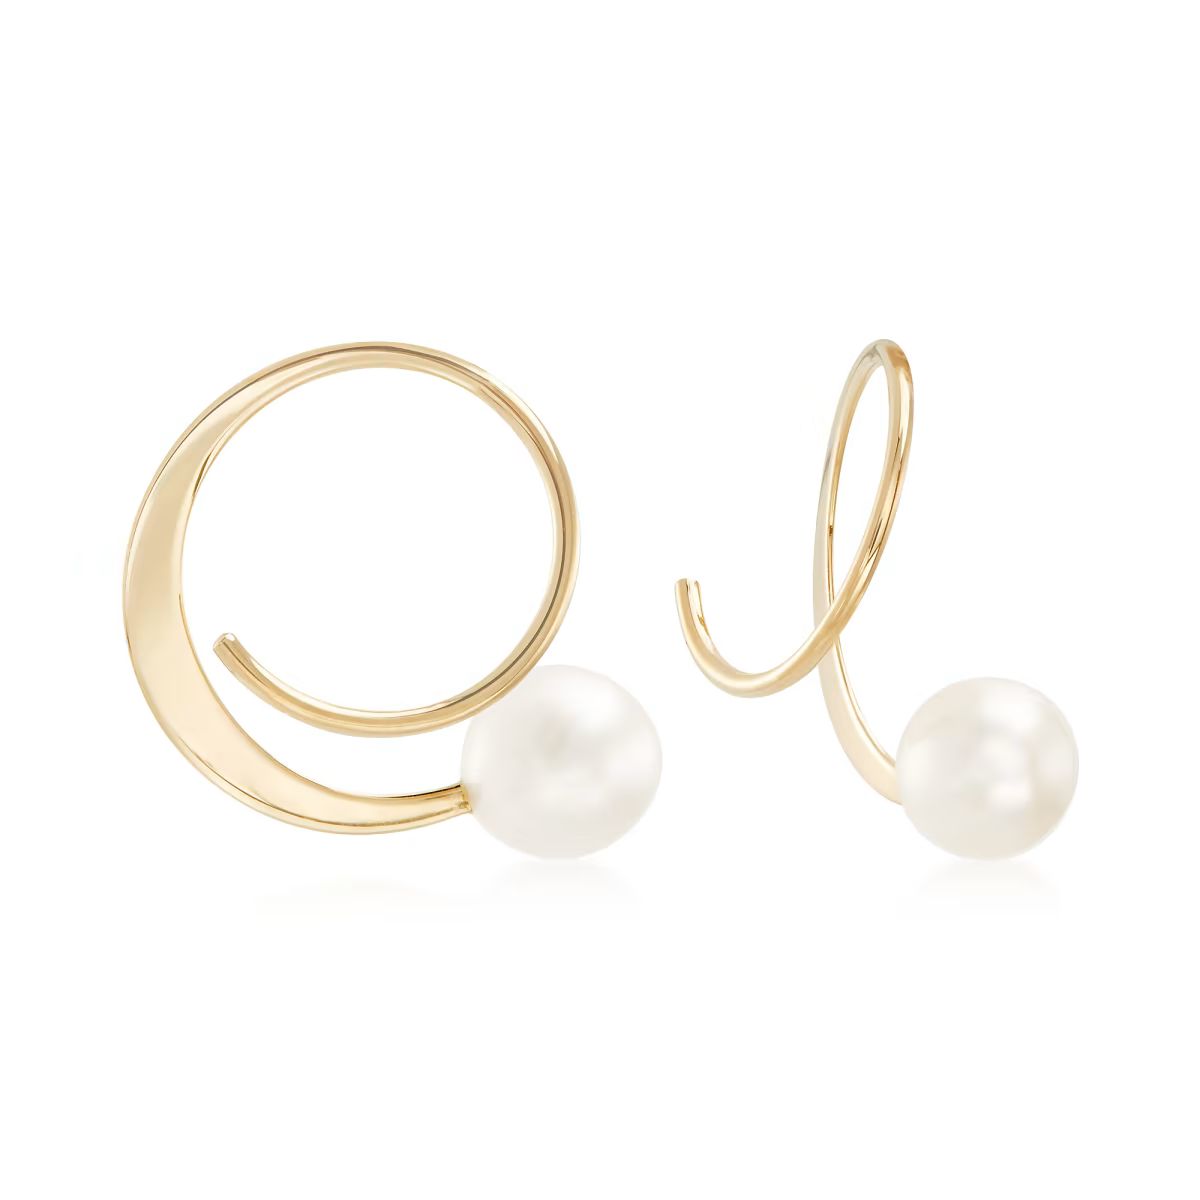 5.5-6mm Cultured Pearl Spiral Hoop Earrings in 14kt Yellow Gold. 5/8" | Ross-Simons